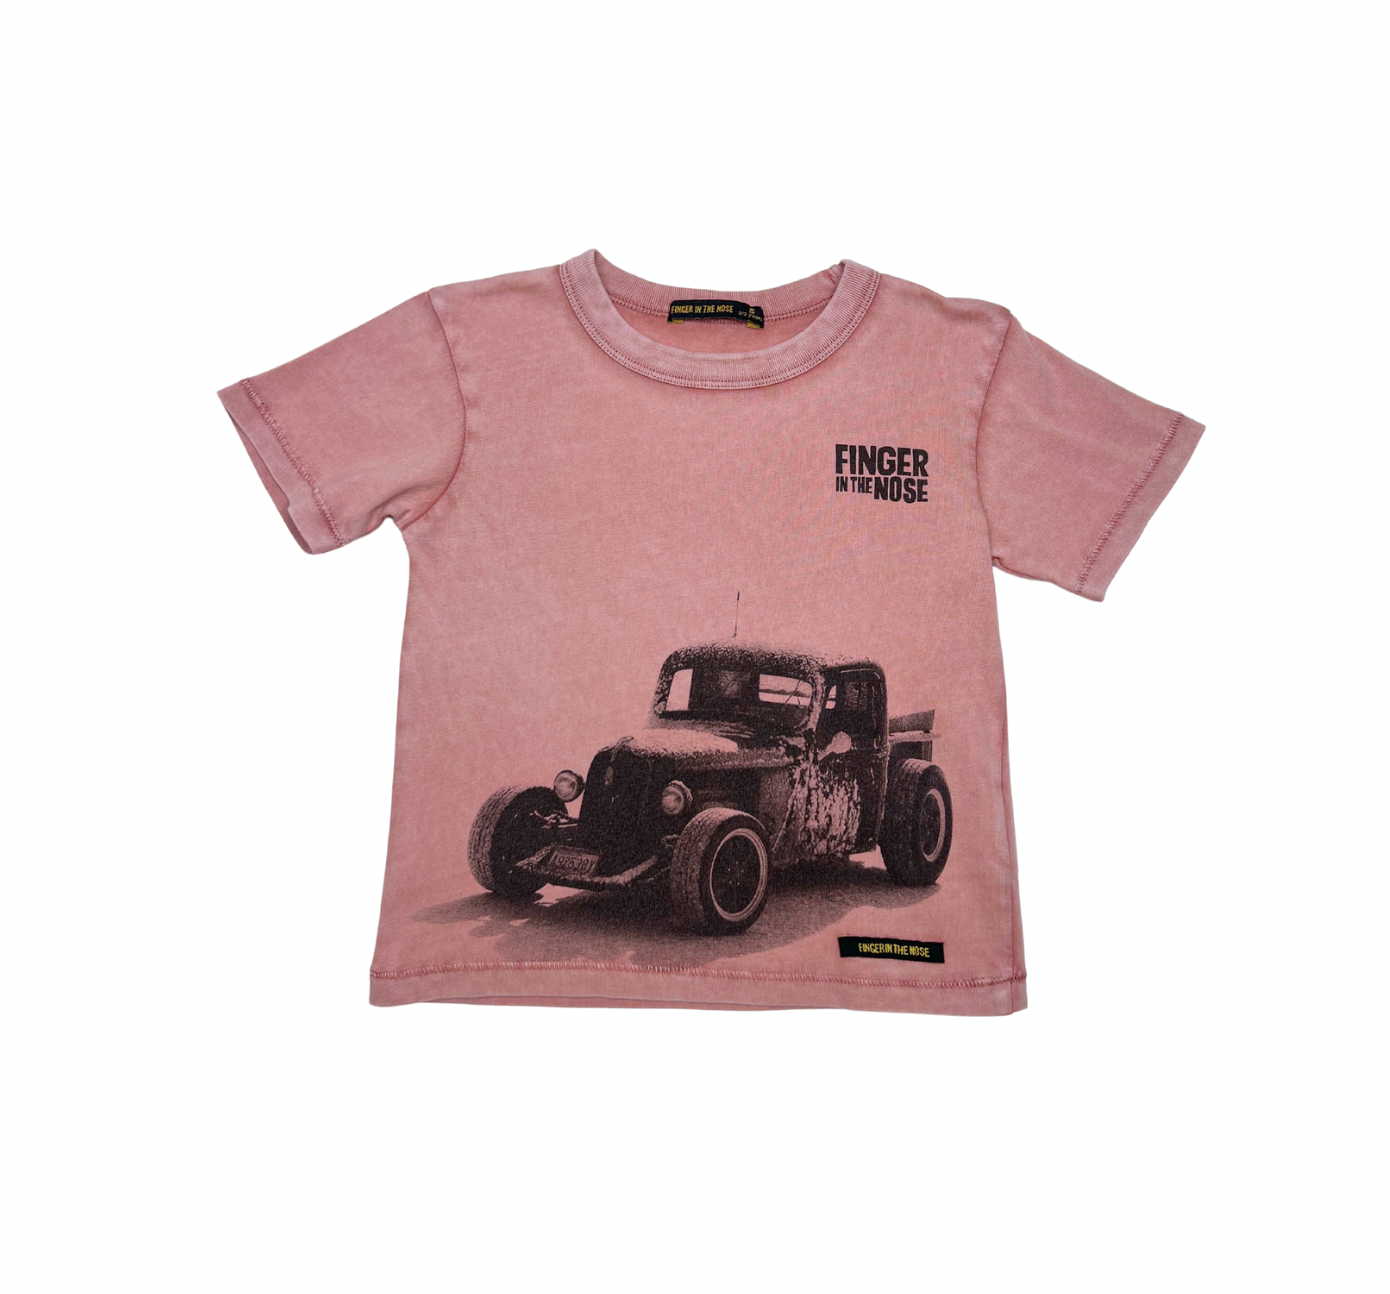 FINGER IN THE NOSE - T-shirt voiture - 2/3 ans